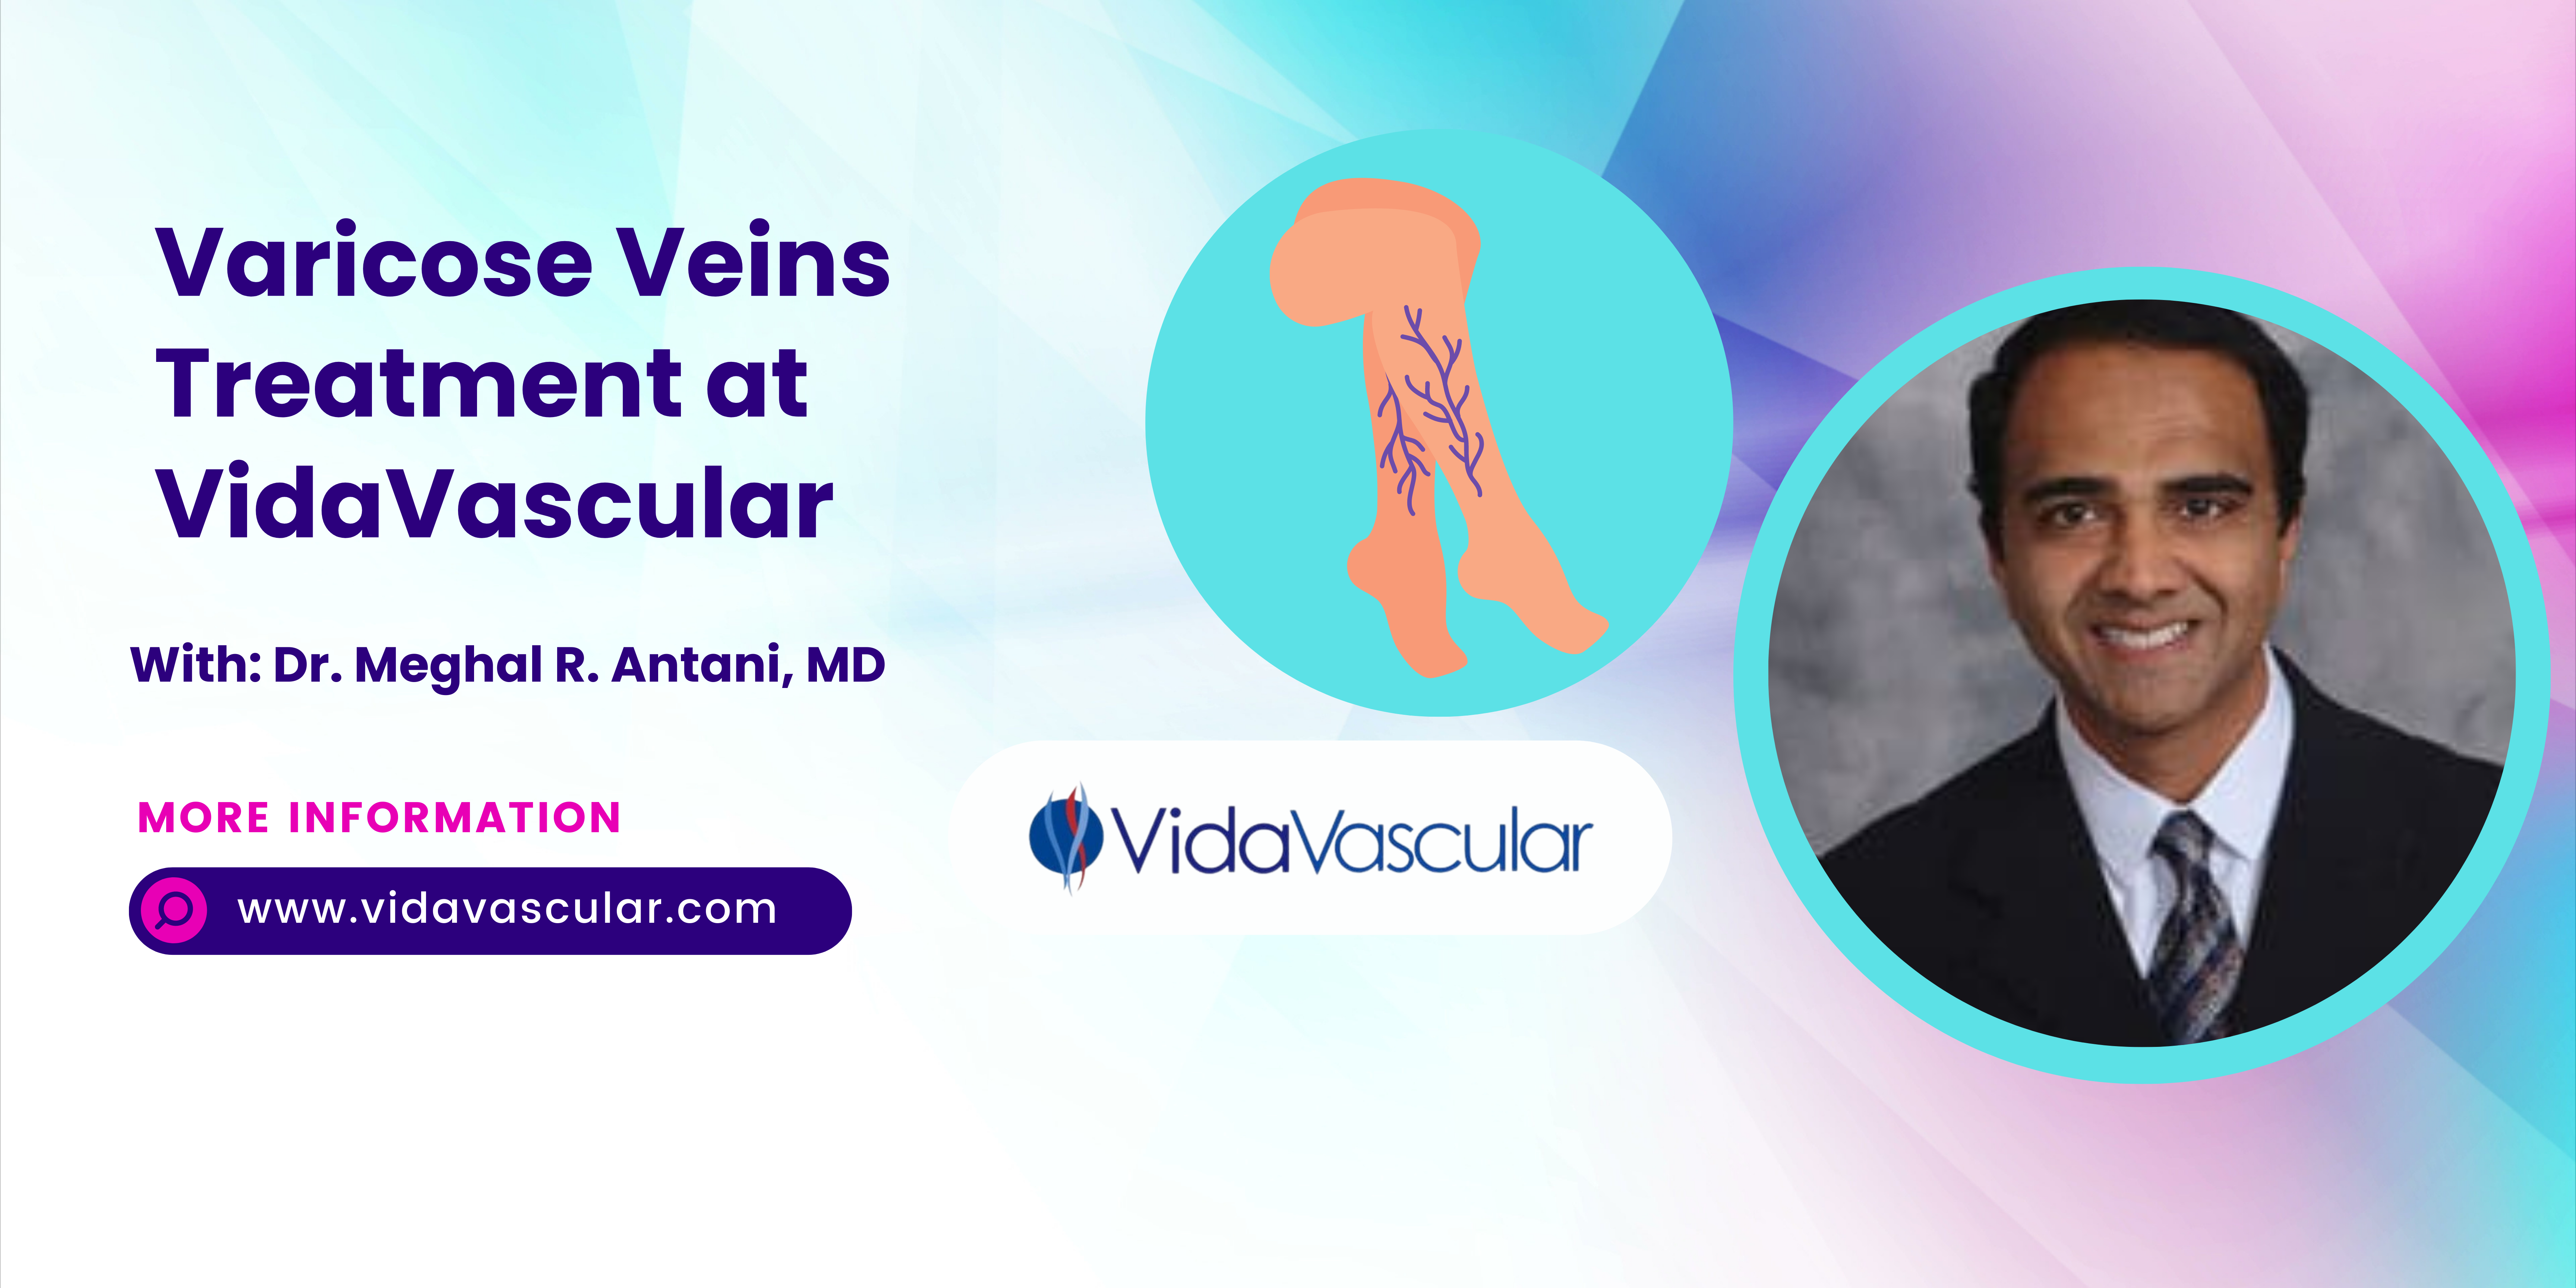 Can Varicose Veins Be Prevented?